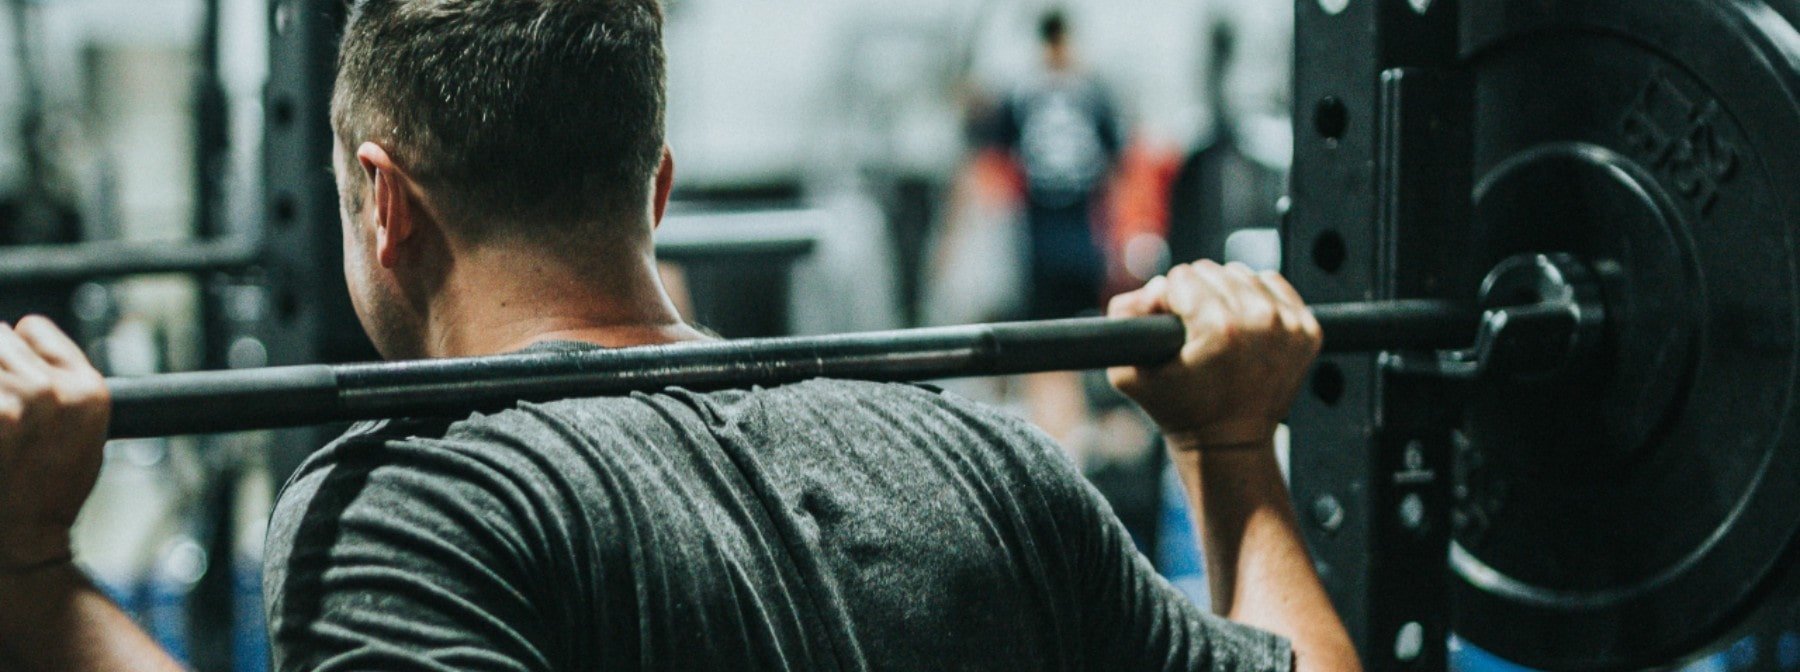 Barbell Squat Form Guide: How To Master This Big-Muscle Move